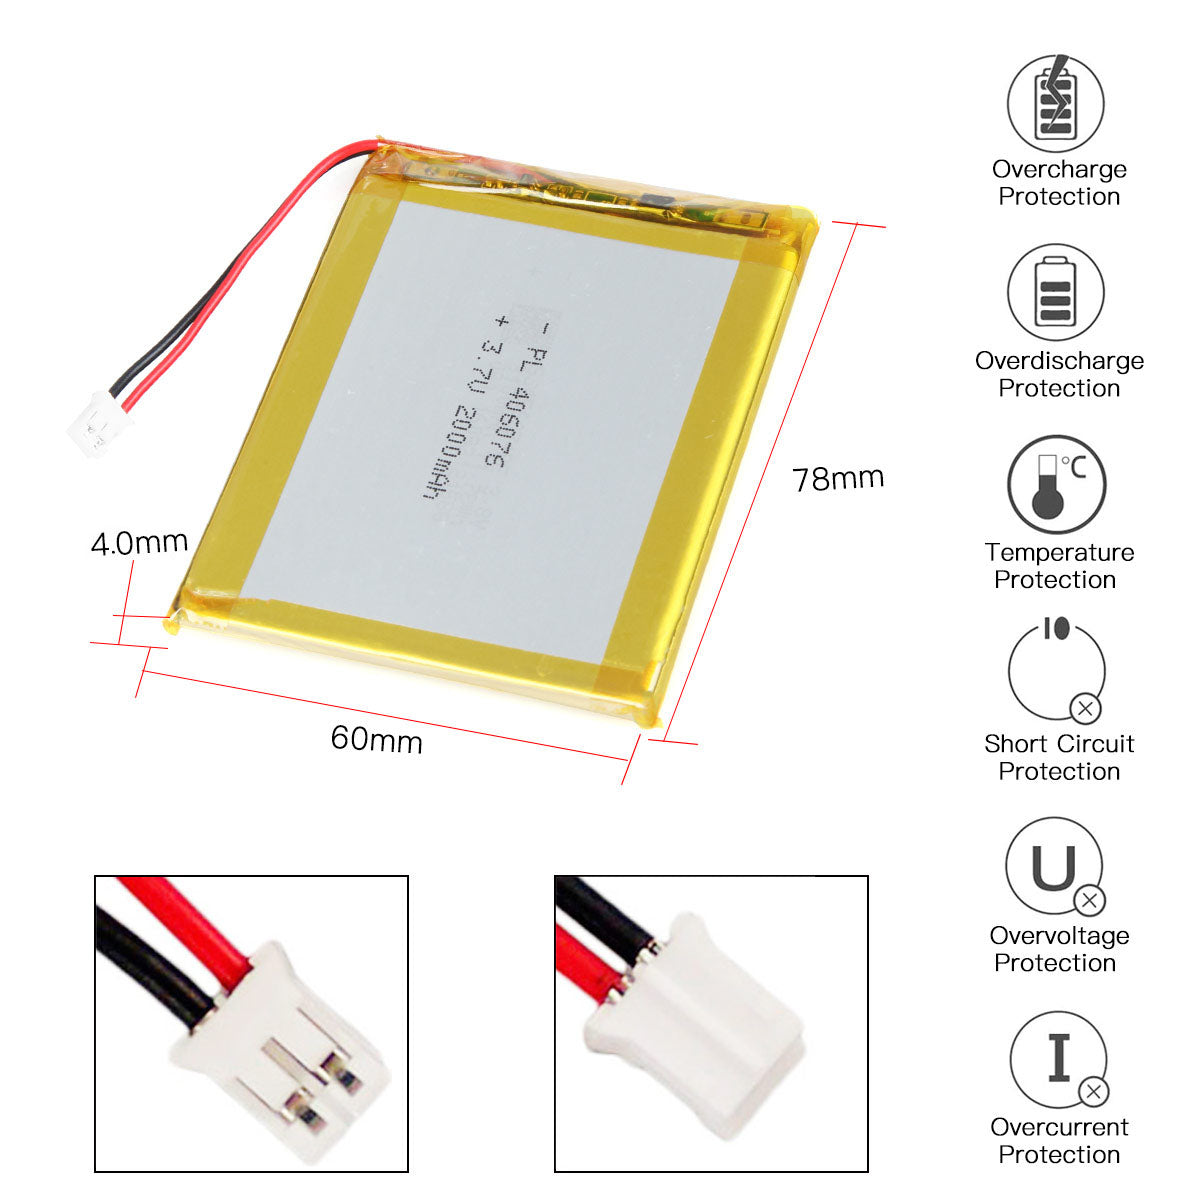 YDL 3.7V 2000mAh 406076 Rechargeable Lithium Polymer Battery Length 78mm